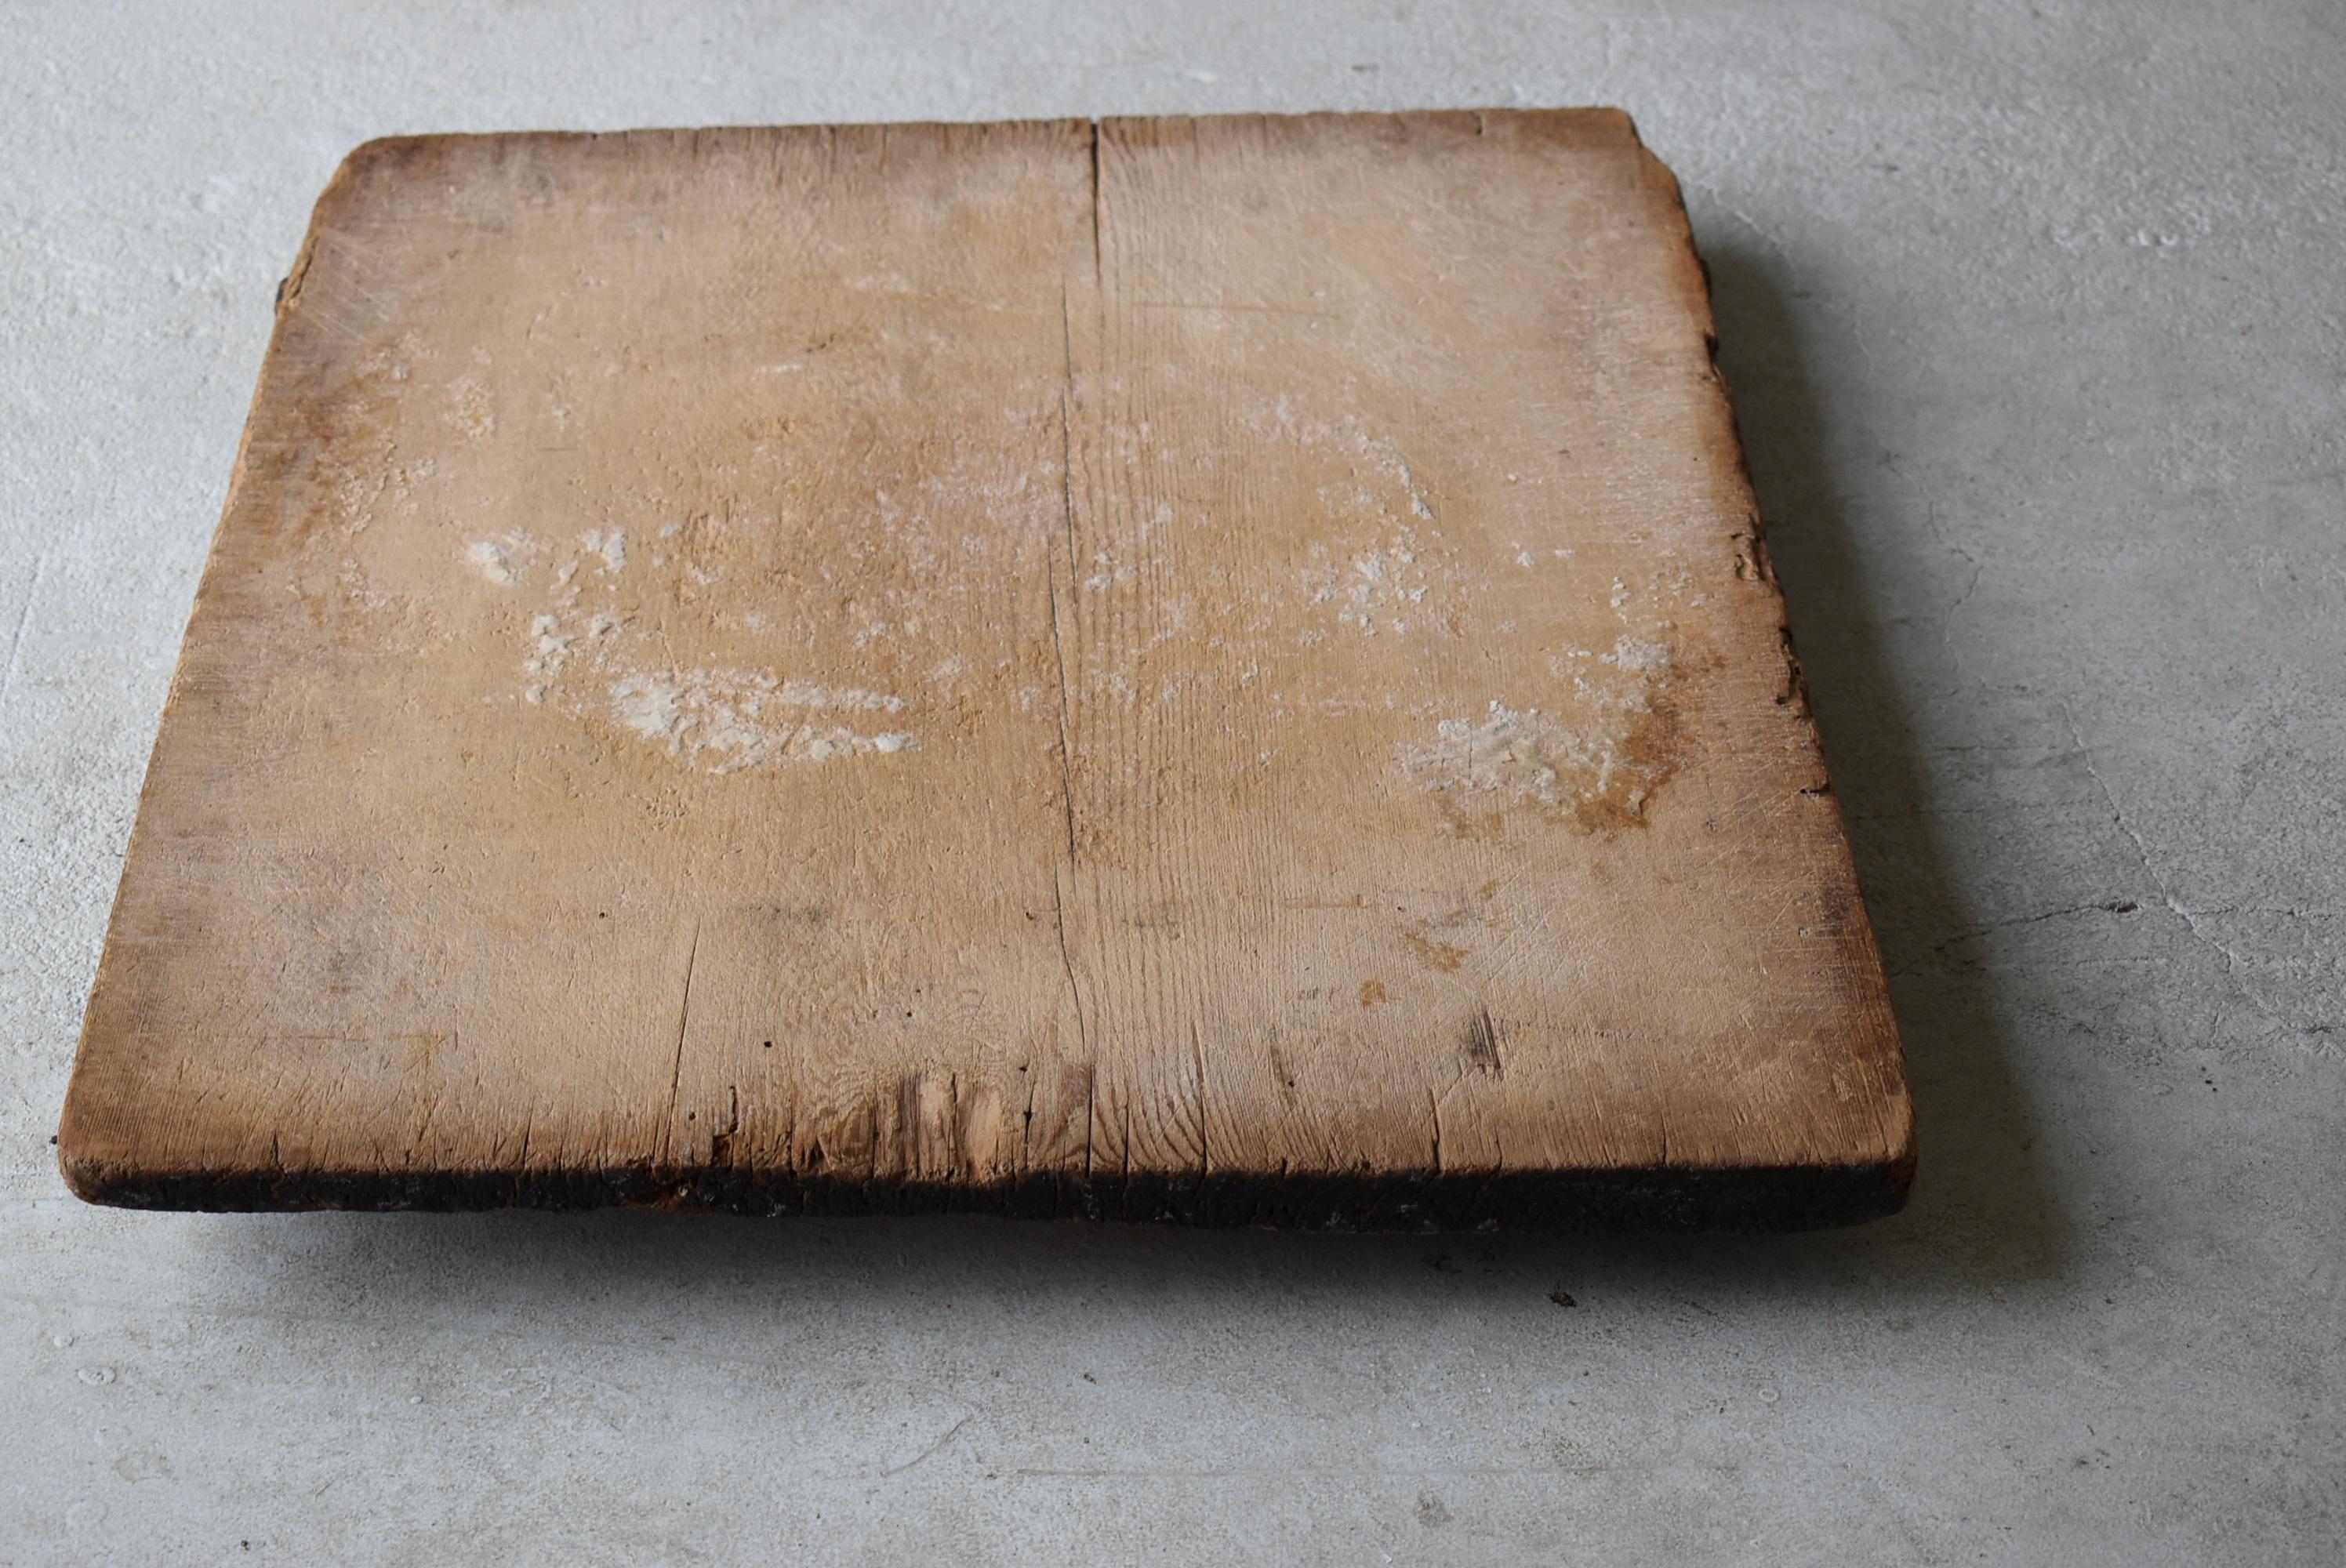 Japanese Antique Wooden Board 1800s-1900s/Abstract Art Working Table Wabisabi 8